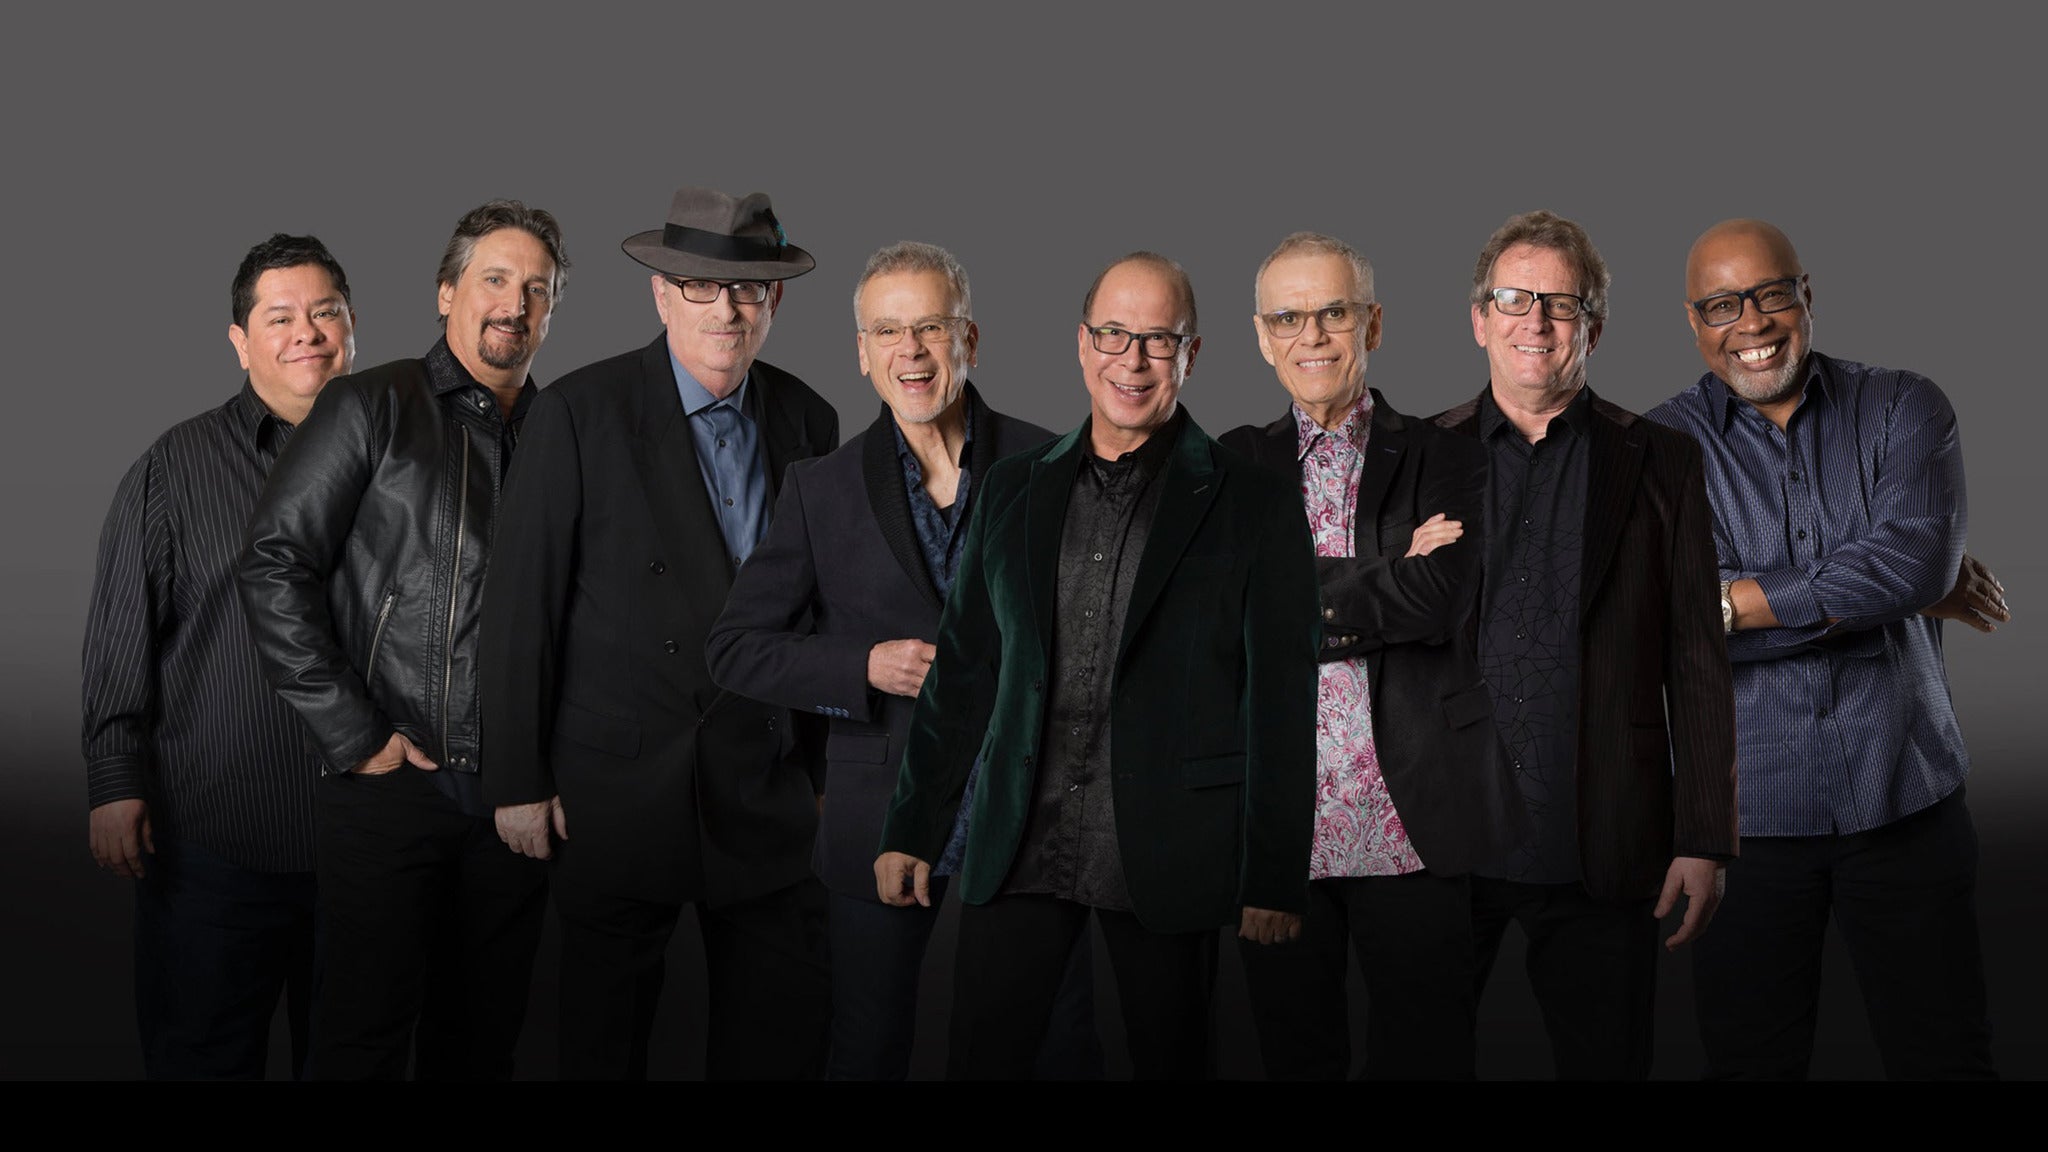 presale code to Tower of Power tickets in Ft Lauderdale at Lillian S. Wells Hall at The Parker